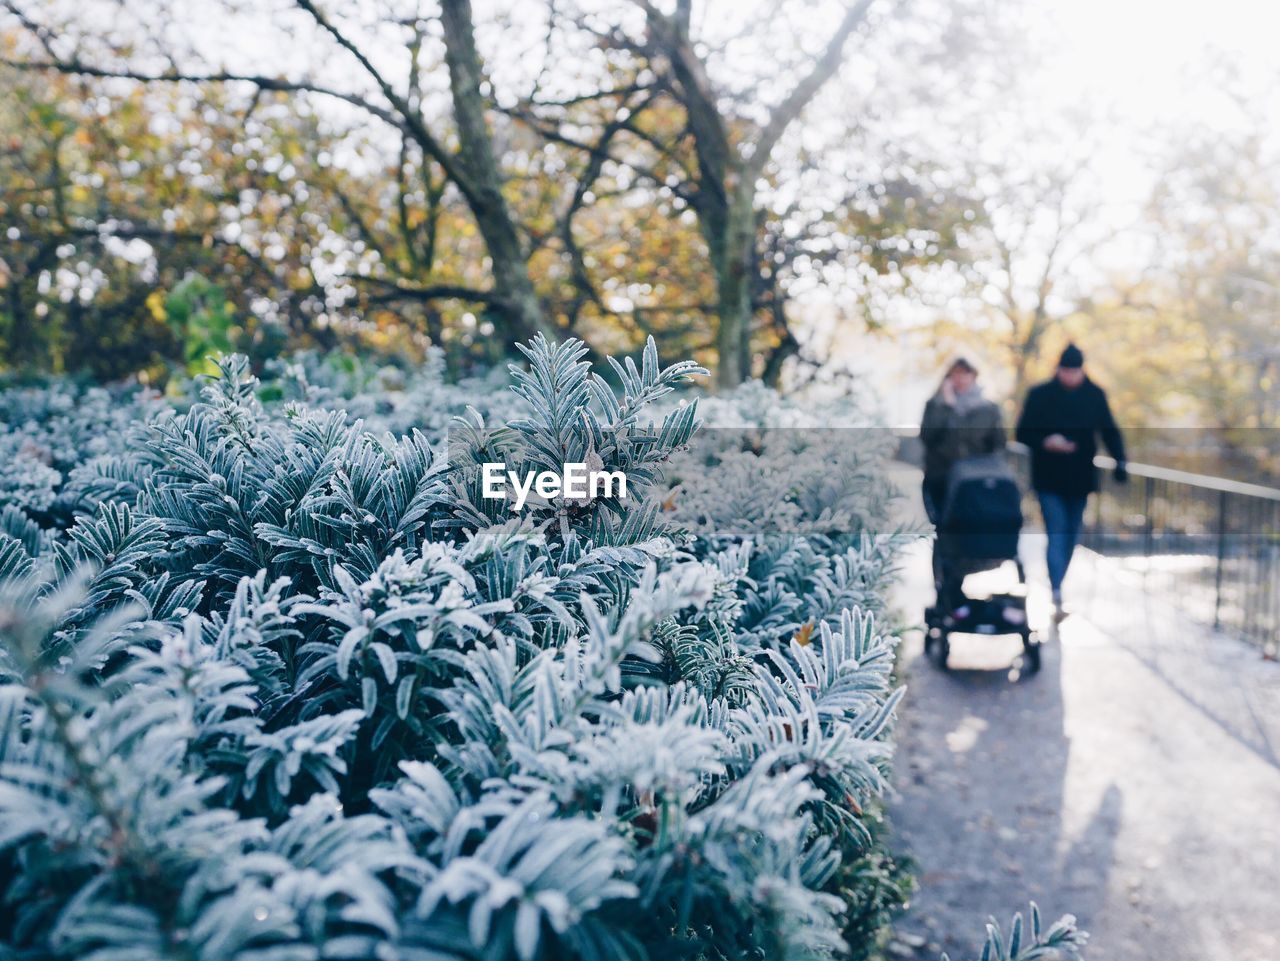 Close-up of frozen plant by couple walking with baby stroller on footpath